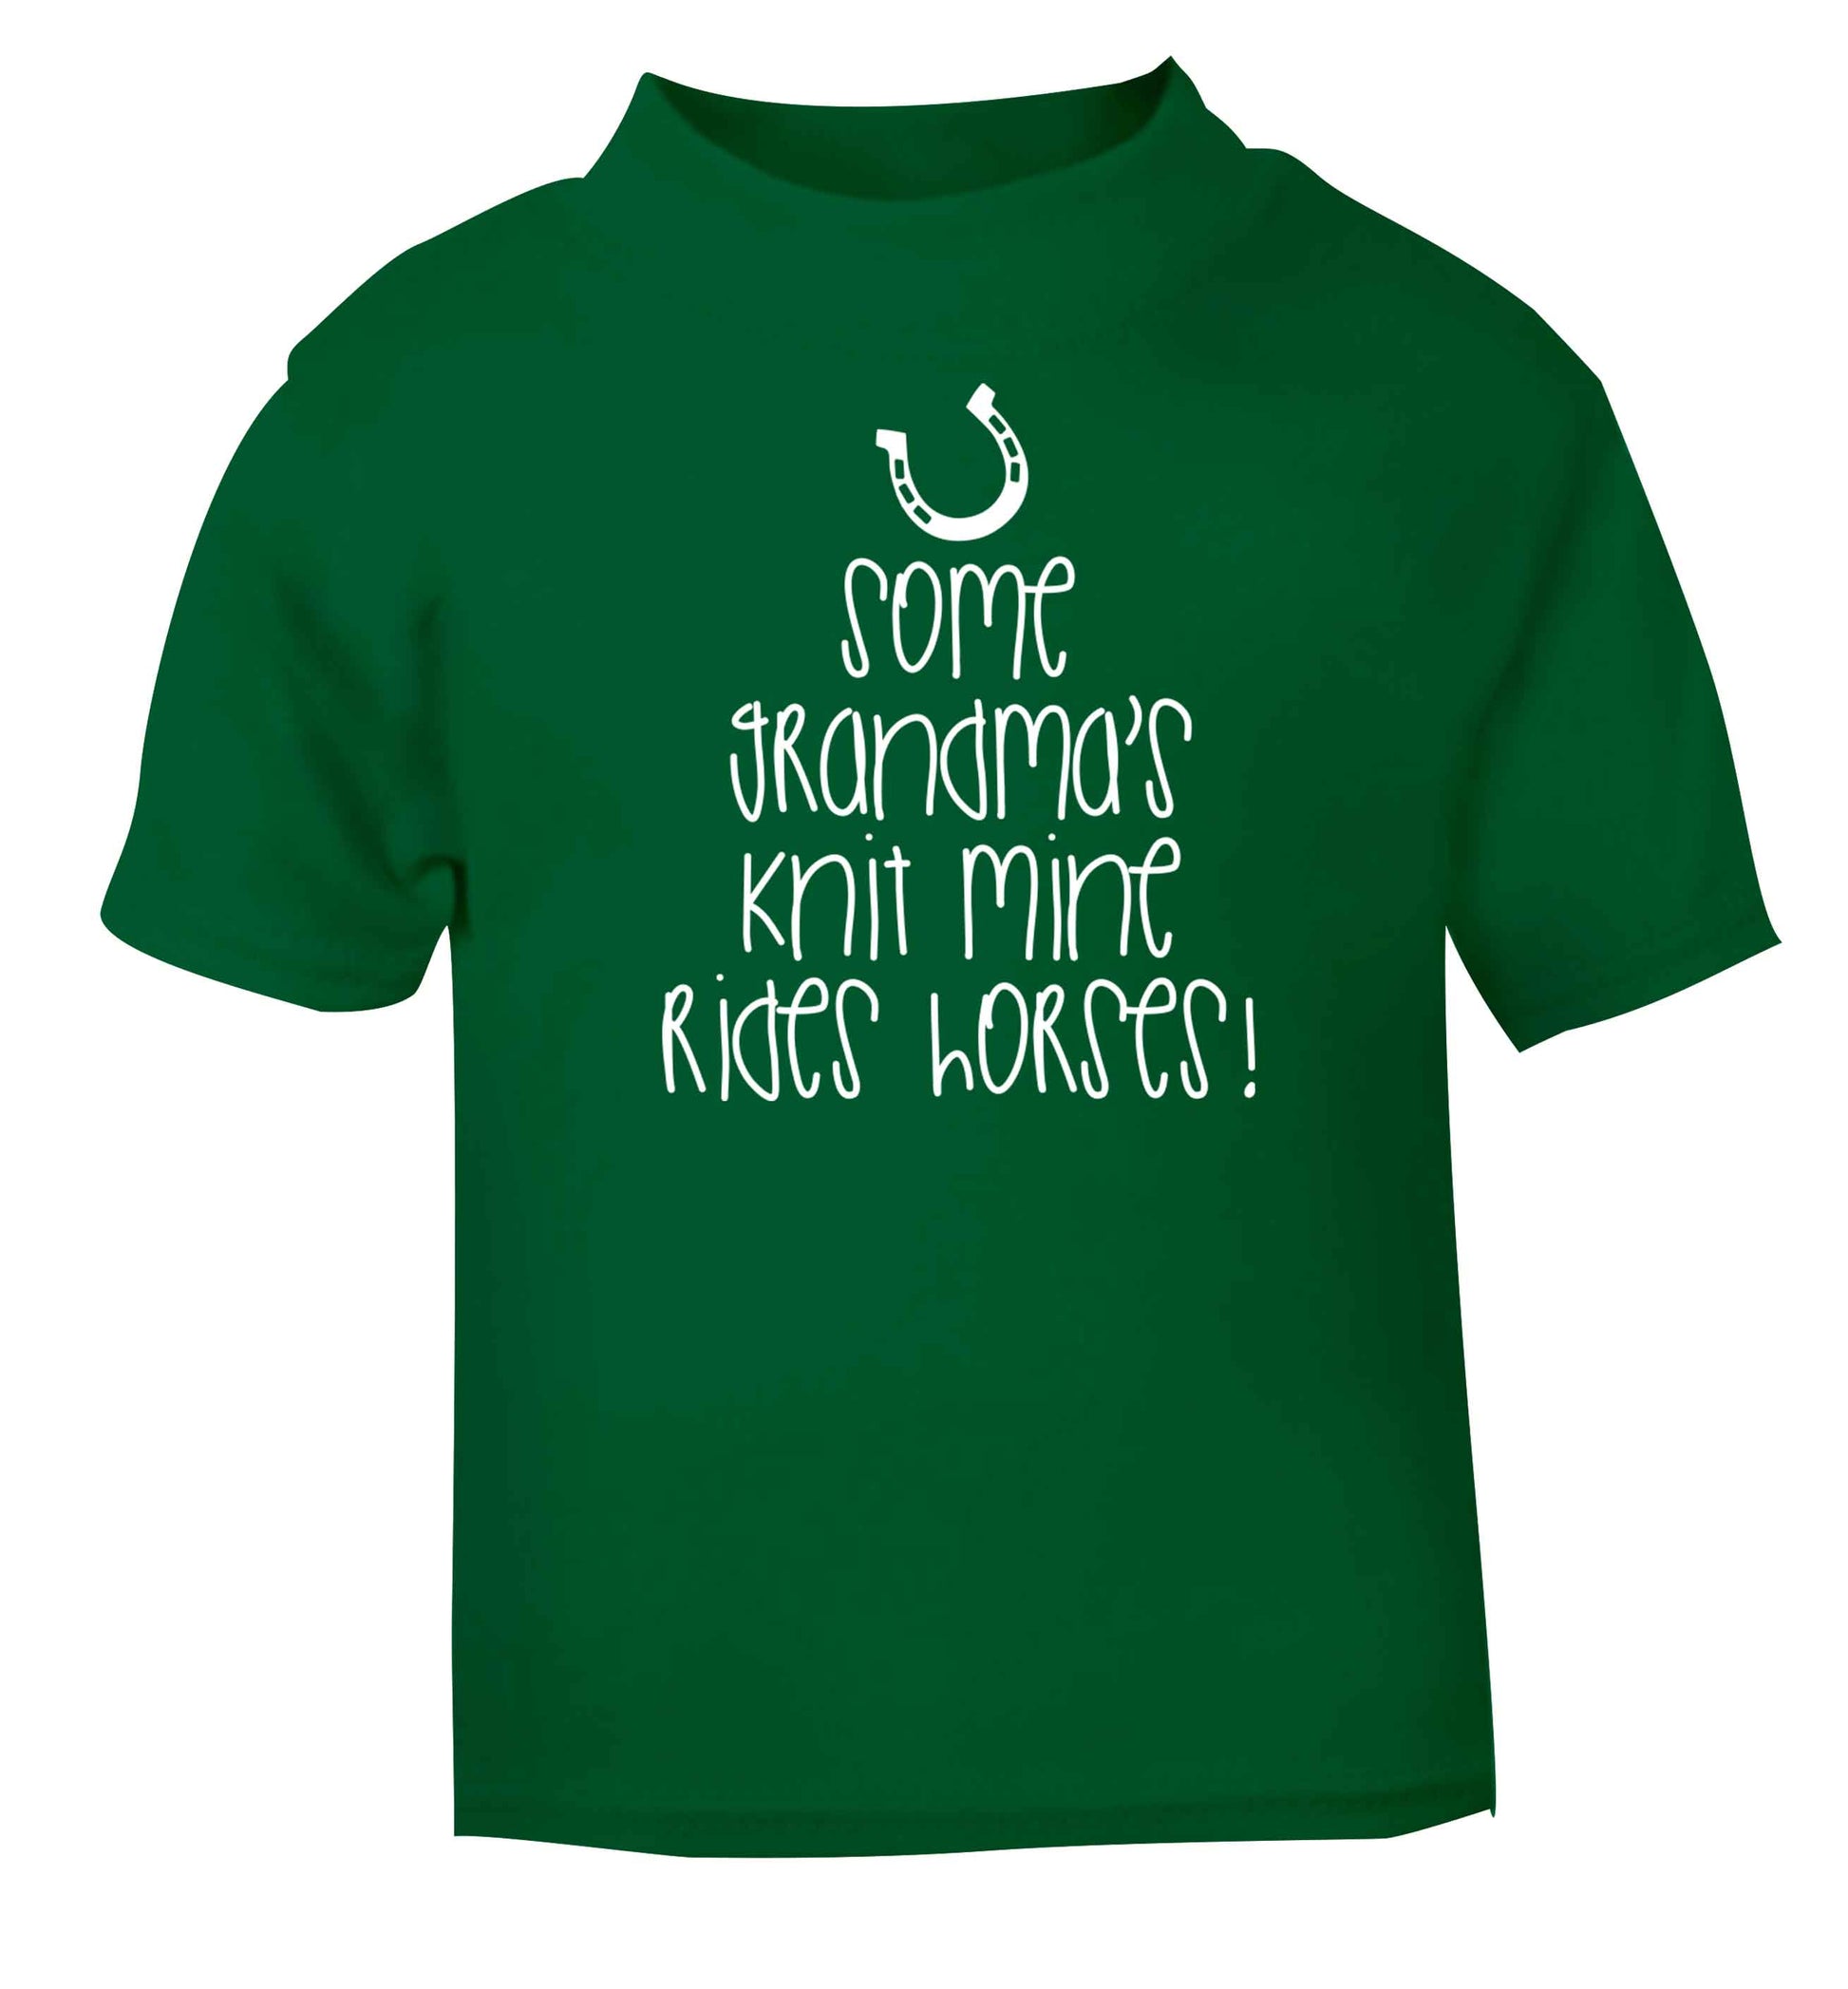 Some grandma's knit mine rides horses green baby toddler Tshirt 2 Years